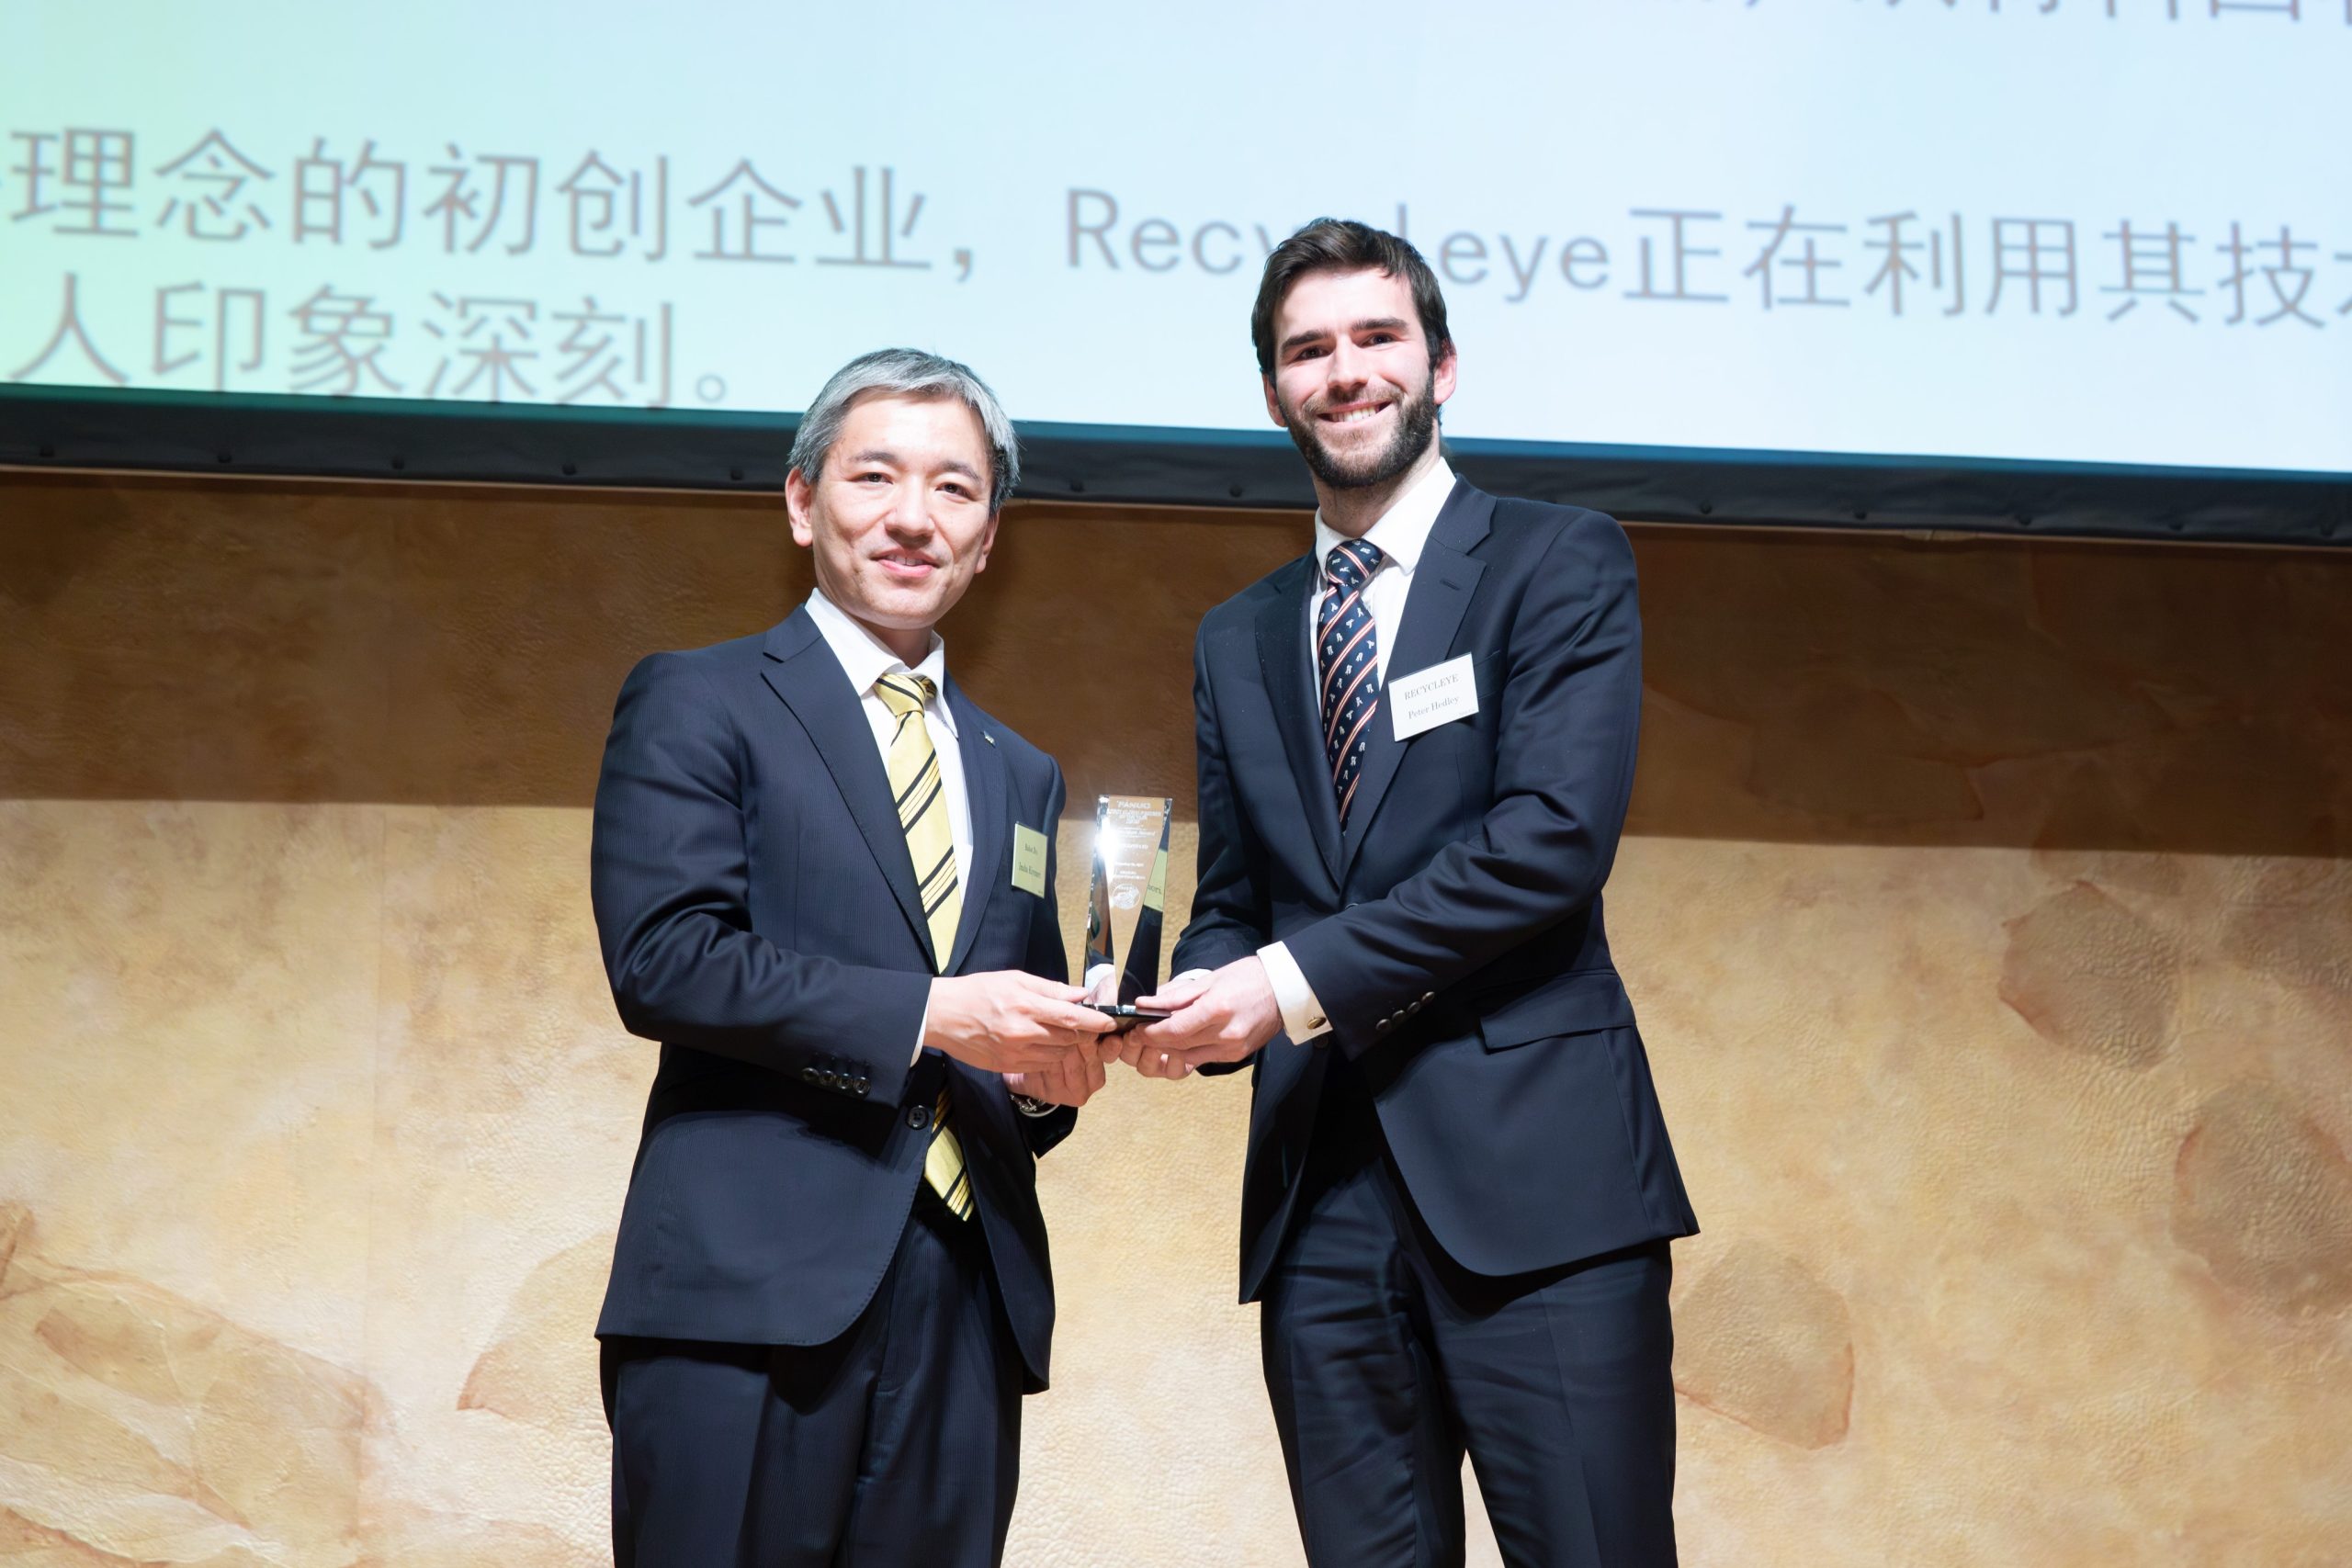 Recycleye wins FANUC award for innovation and extends exclusive robot deal